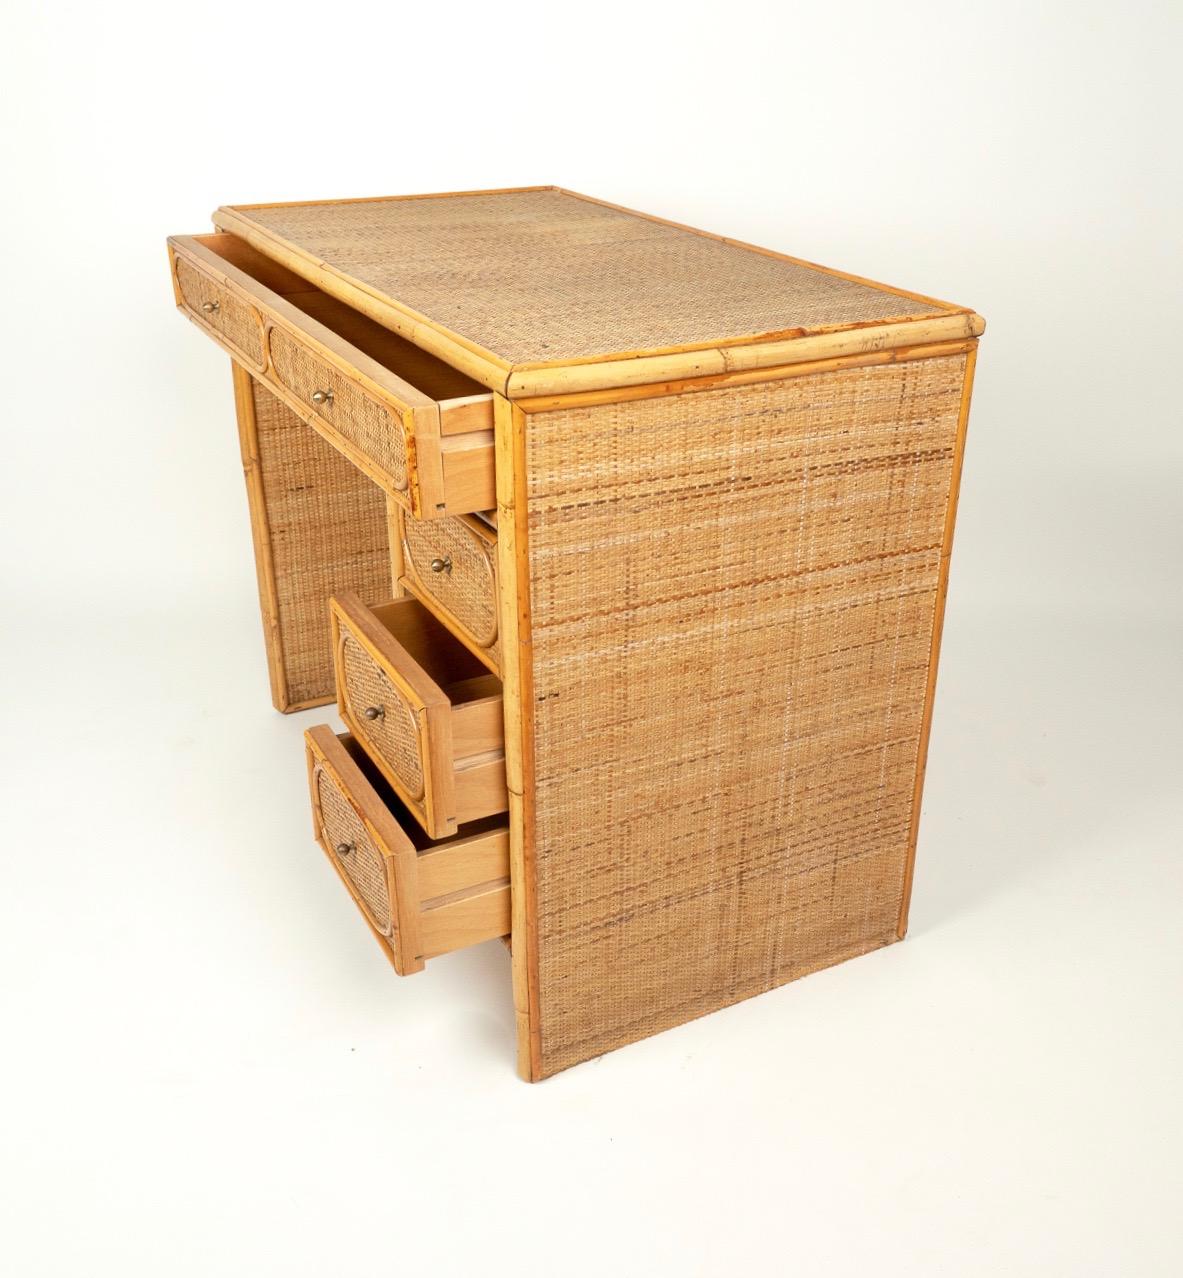 Late 20th Century Midcentury Bamboo, Wicker and Rattan Italian Desk Table with Drawers, 1970s For Sale